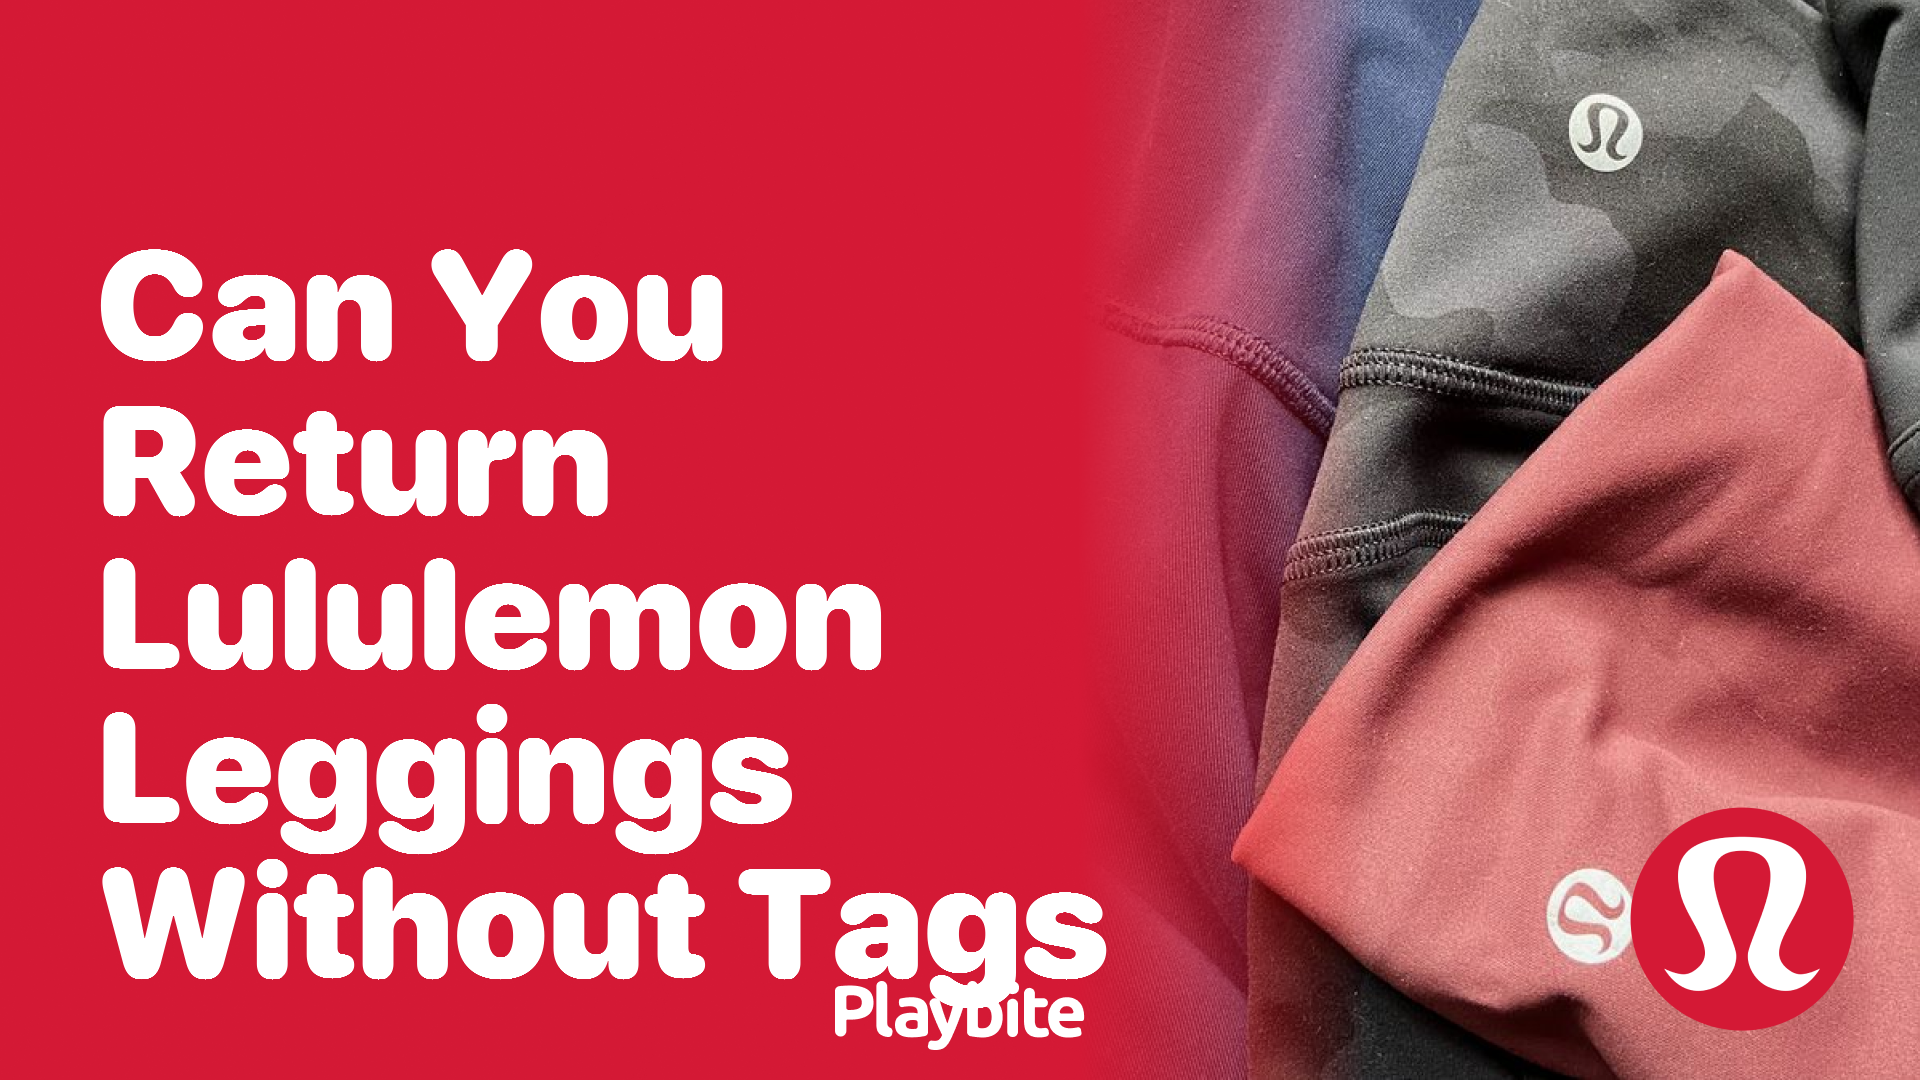 Can You Return Lululemon Leggings Without Tags? - Playbite